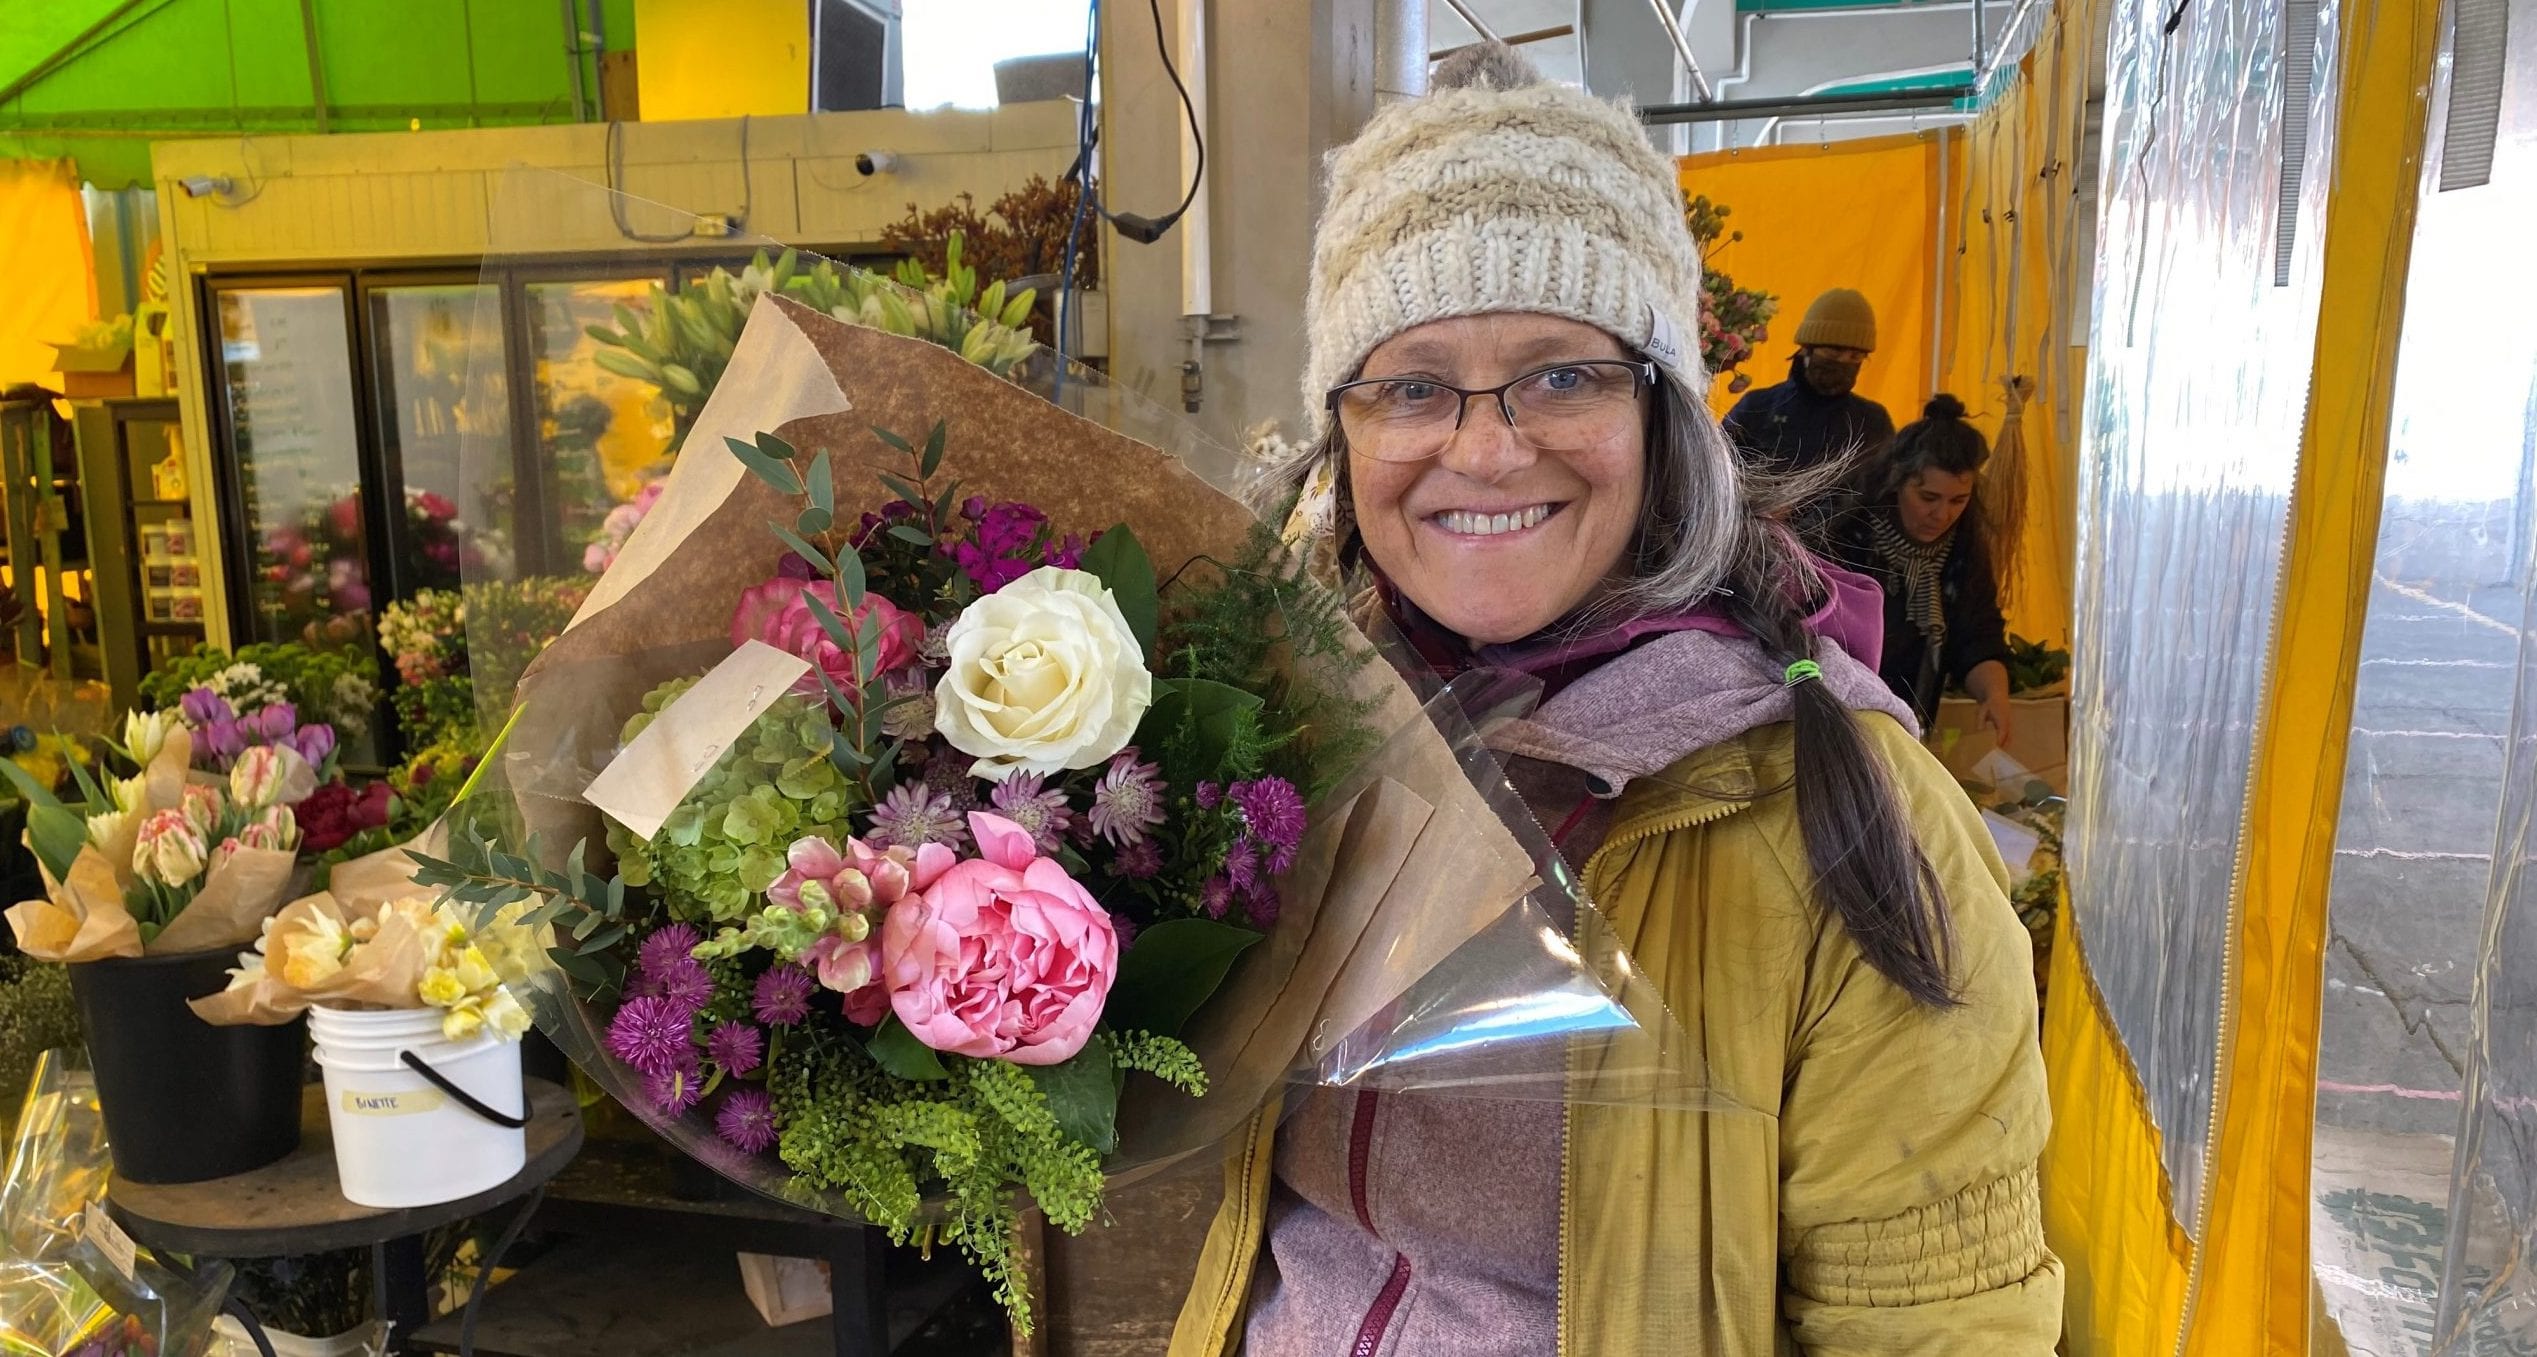 Florist delivers $4,000 worth of flowers to long-term care facilities